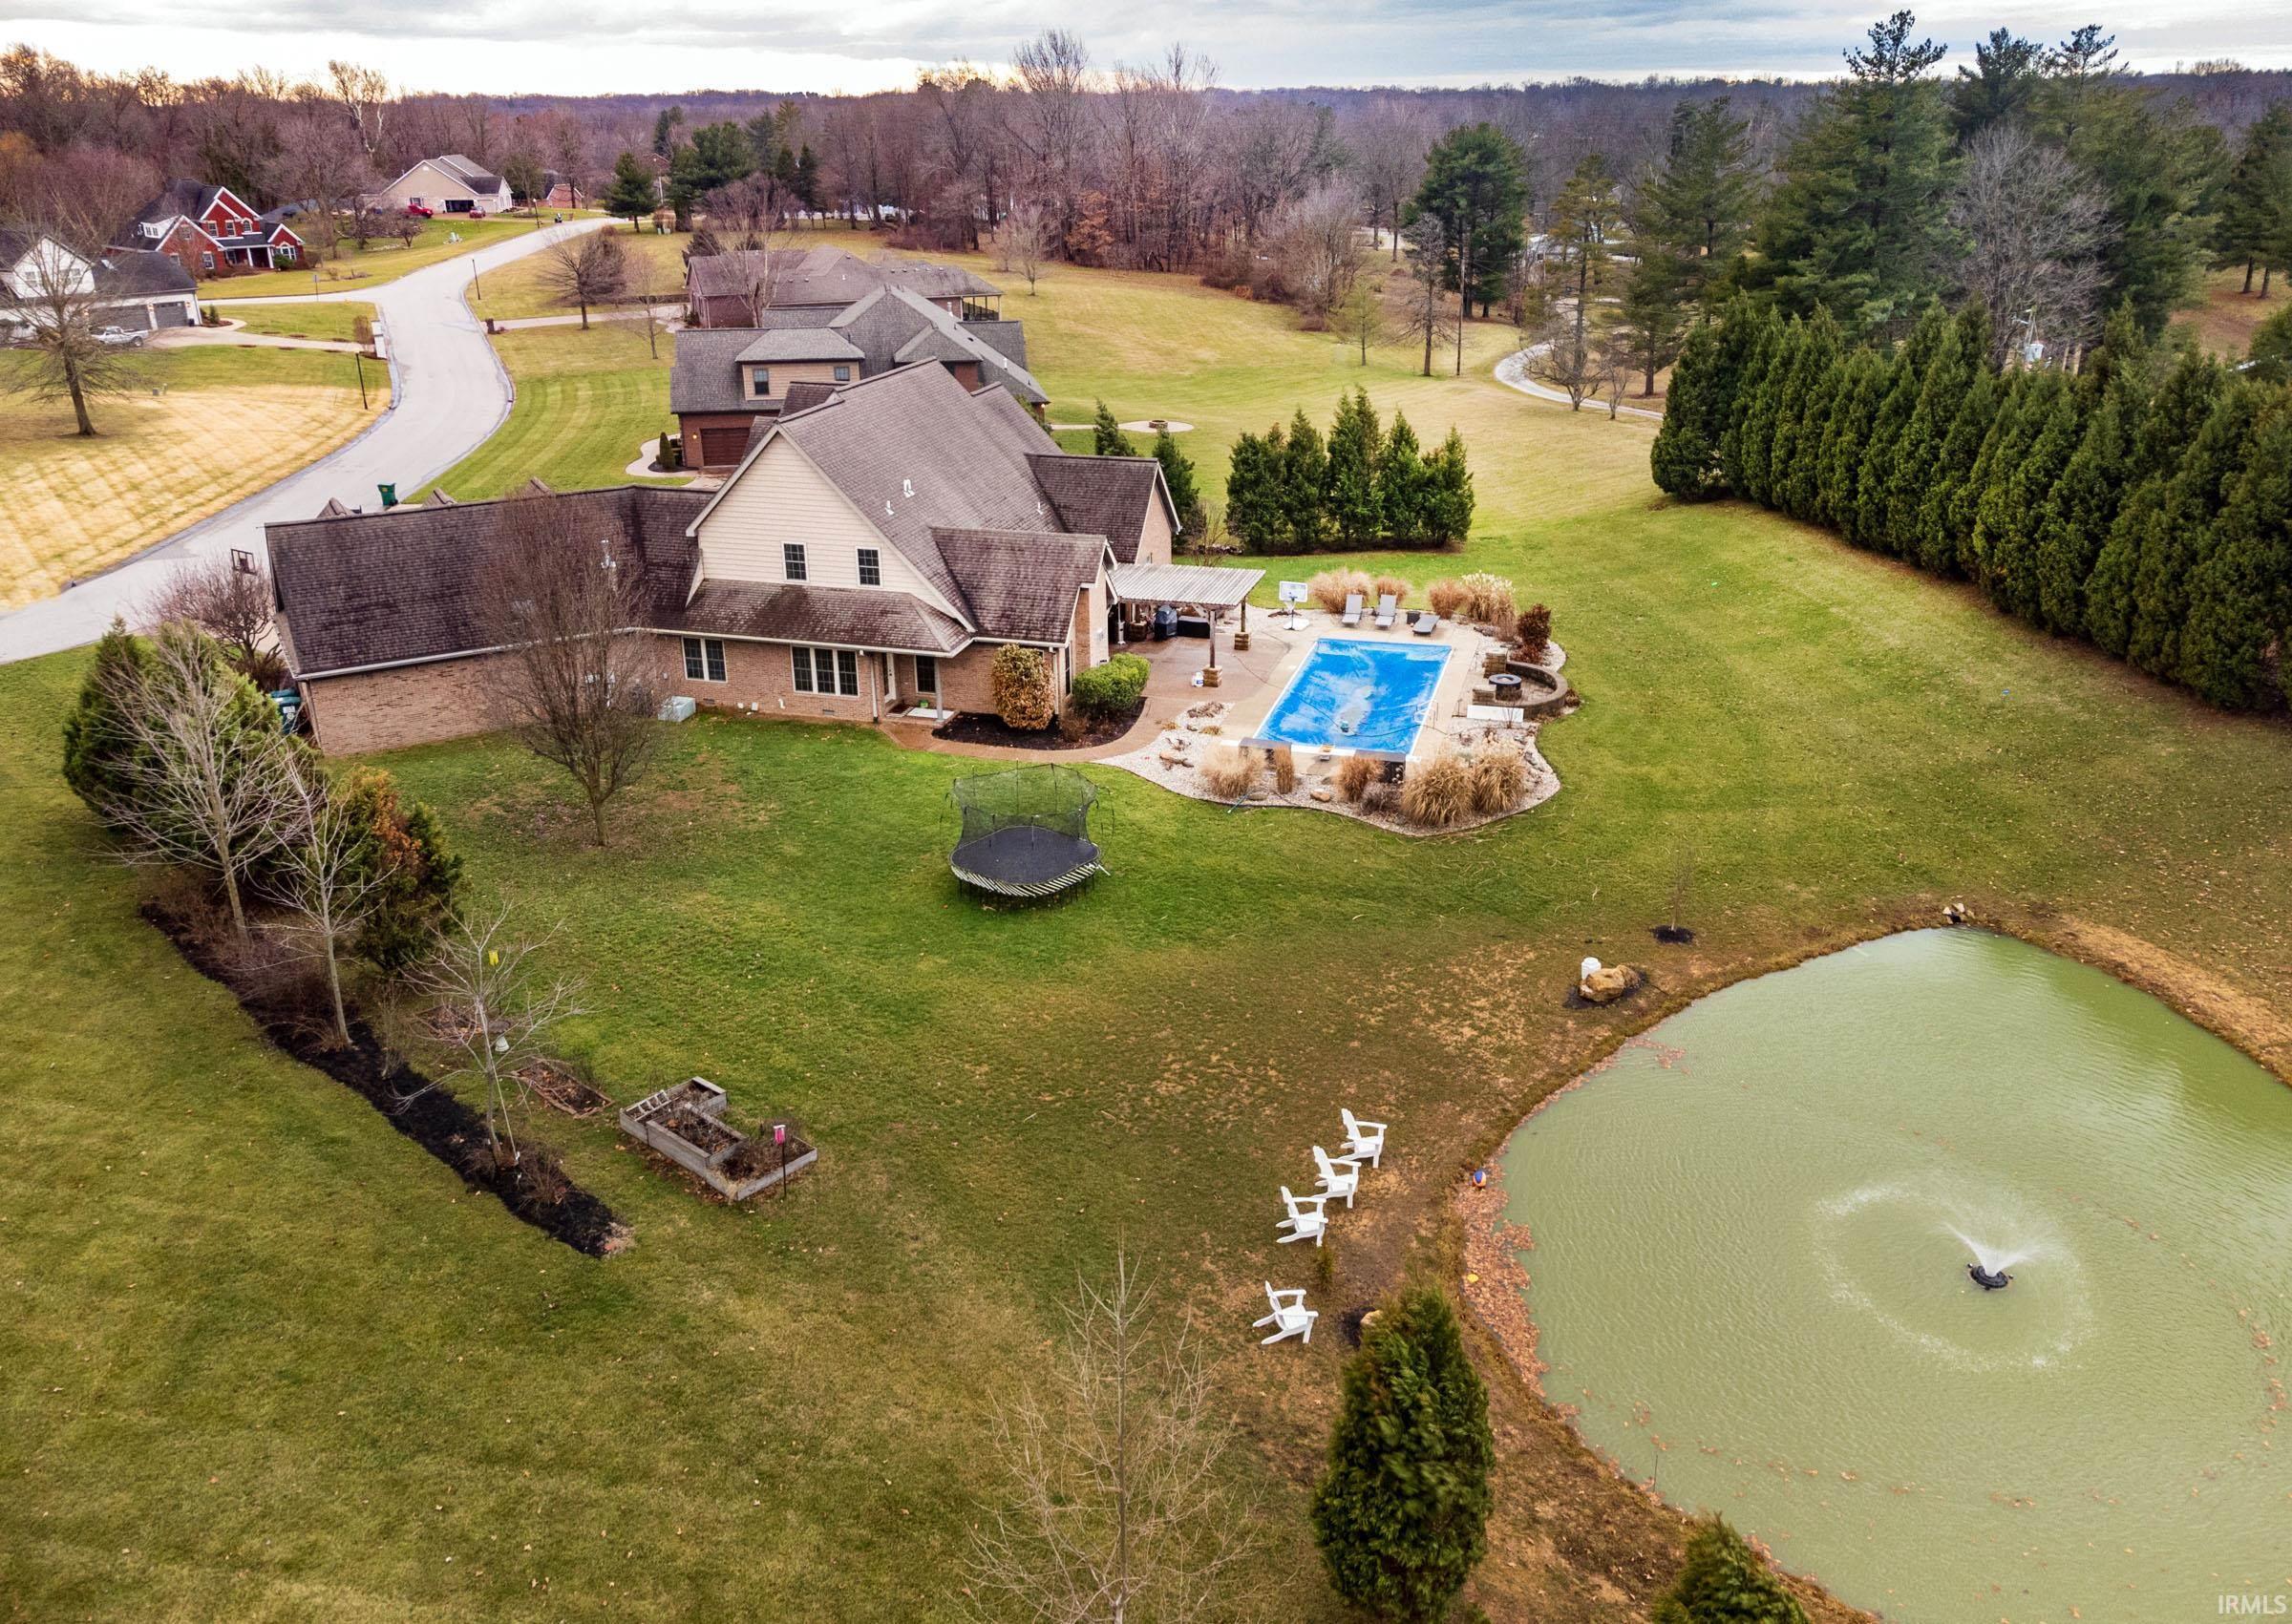 Private Backyard w/ inground pool and pond